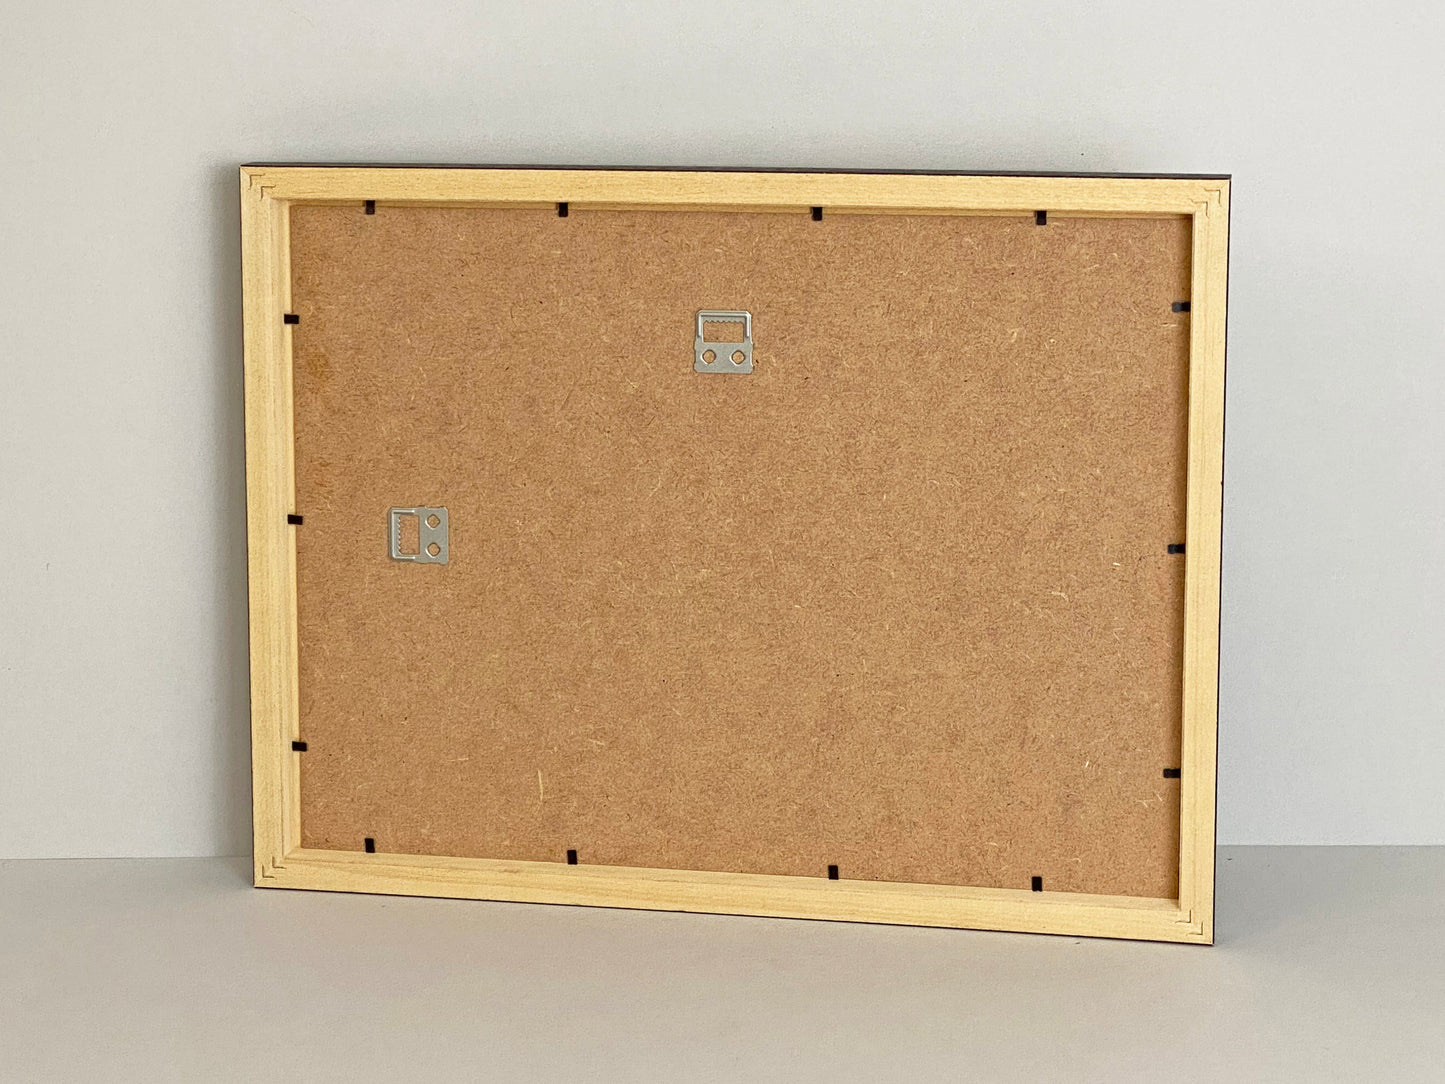 Multi Aperture Photo Frame. Holds Four A4 sized images/Certificates. 35x100.